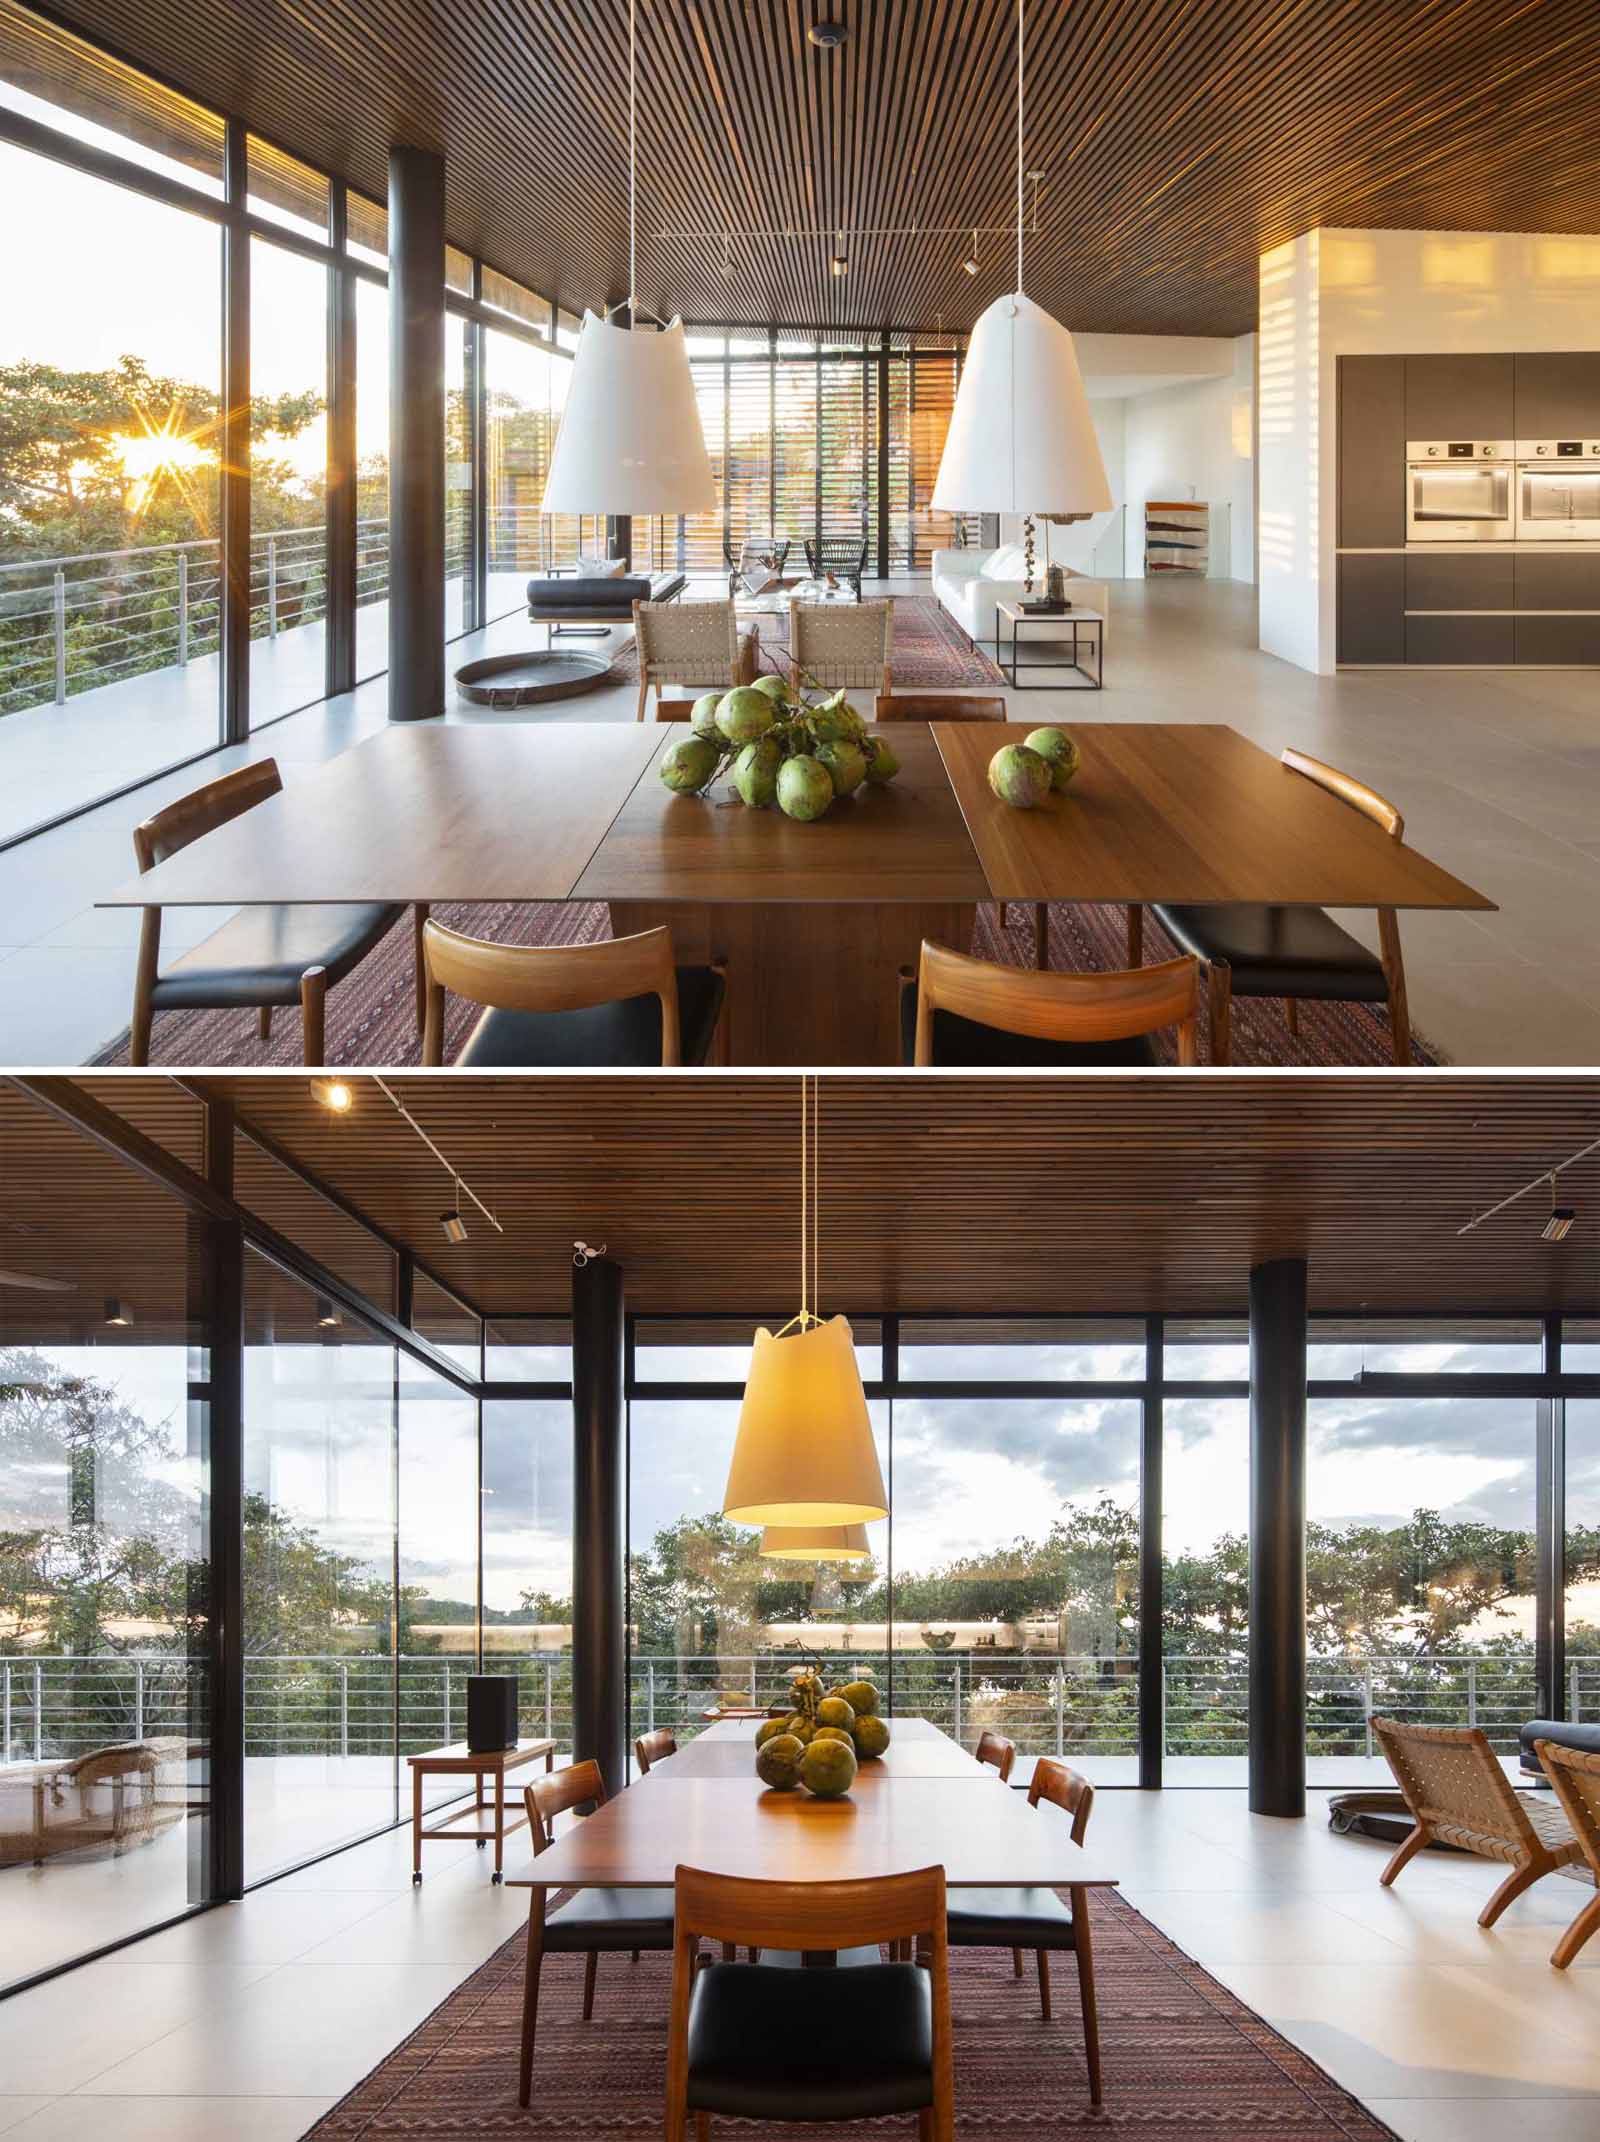 Inside this modern home, the living room shares the open floor plan with the dining room, all of which feature floor-to-ceiling windows, flooding the interior with natural light.